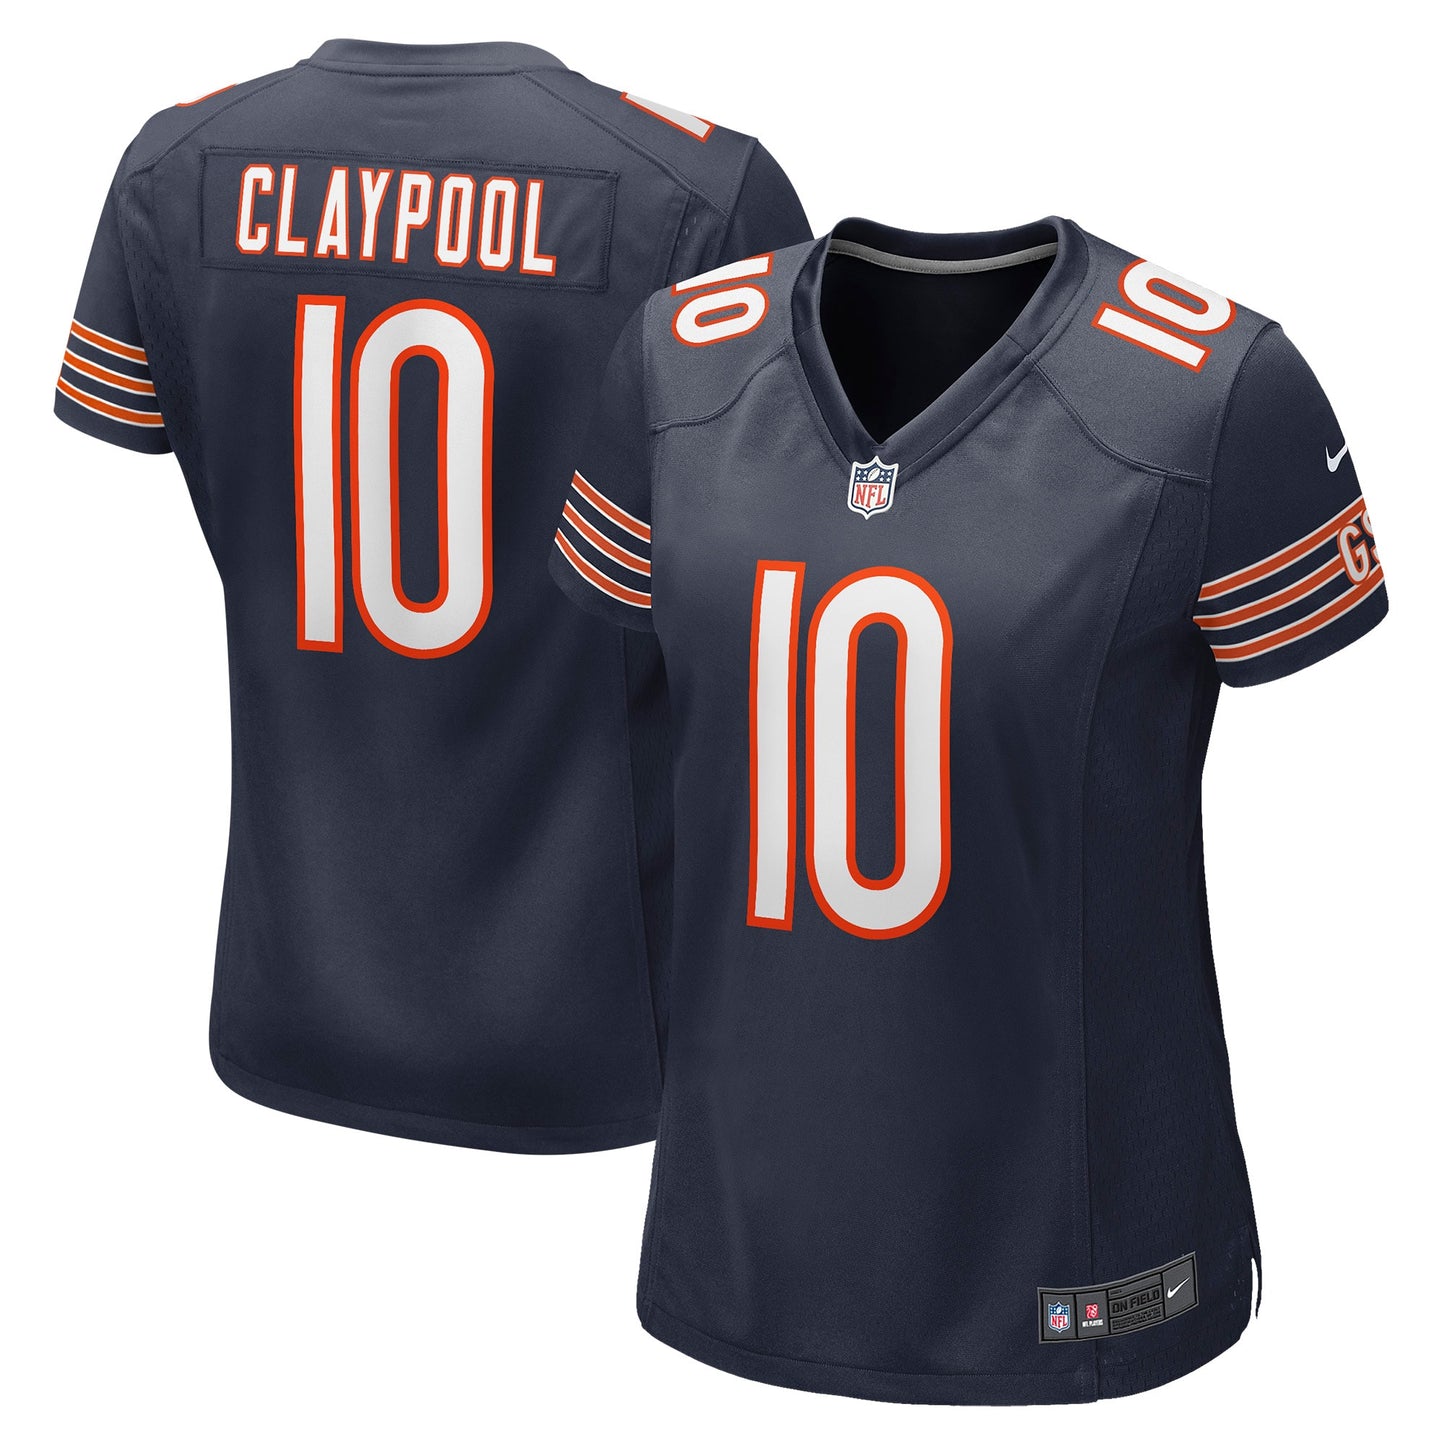 Chase Claypool Chicago Bears Nike Women's Game Player Jersey - Navy